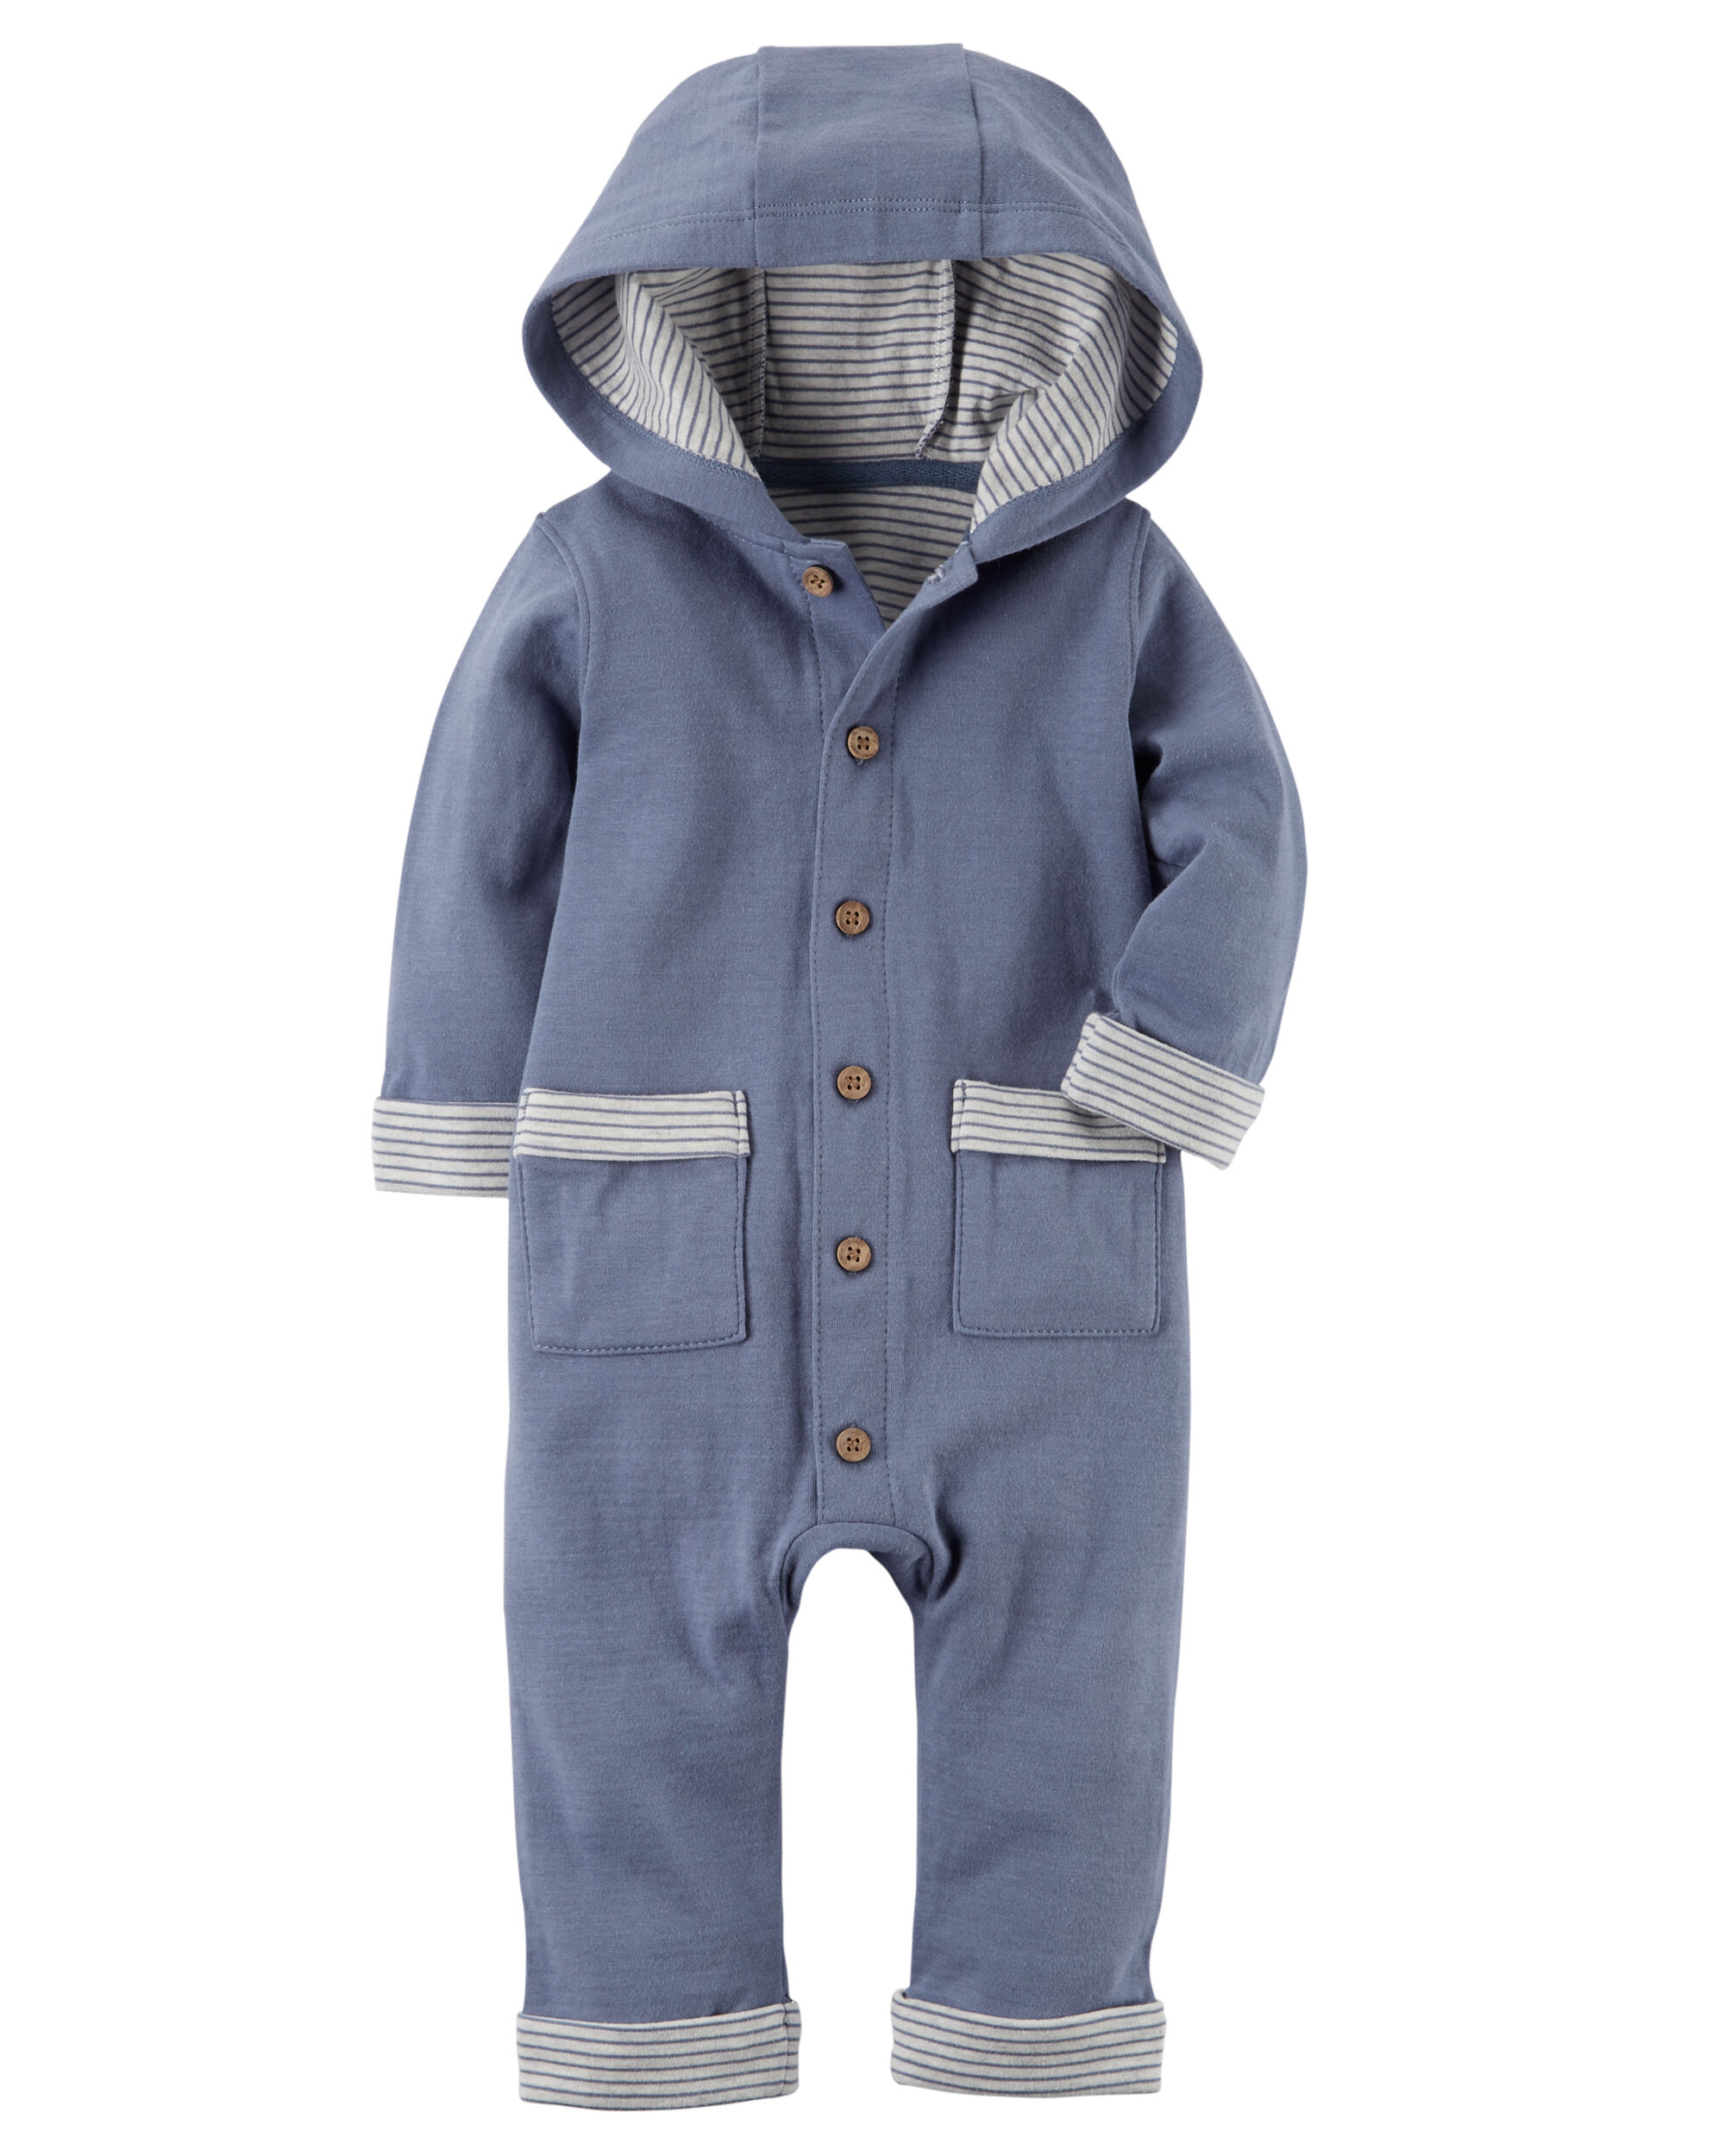 Baby Boy Clothes Clearance & Sale Carter's Free Shipping